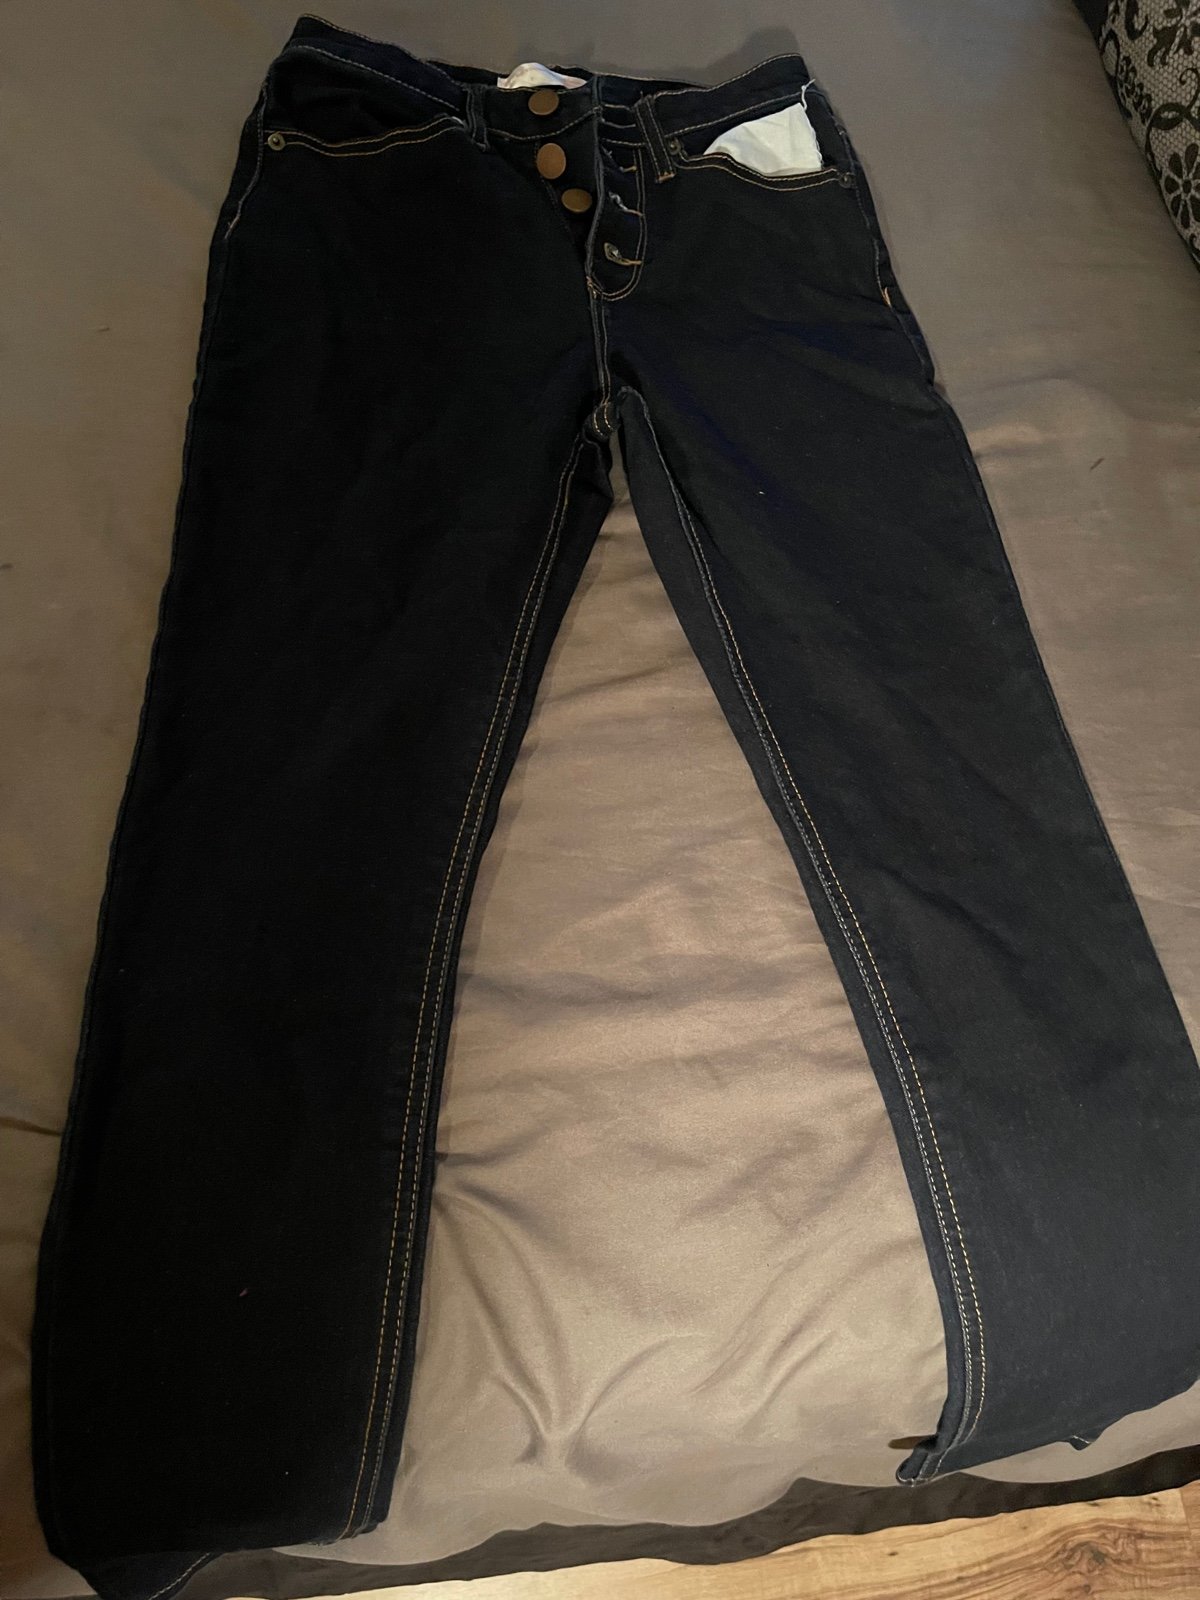 cheapest place to buy  jeans lO8M9HIWA Cheap